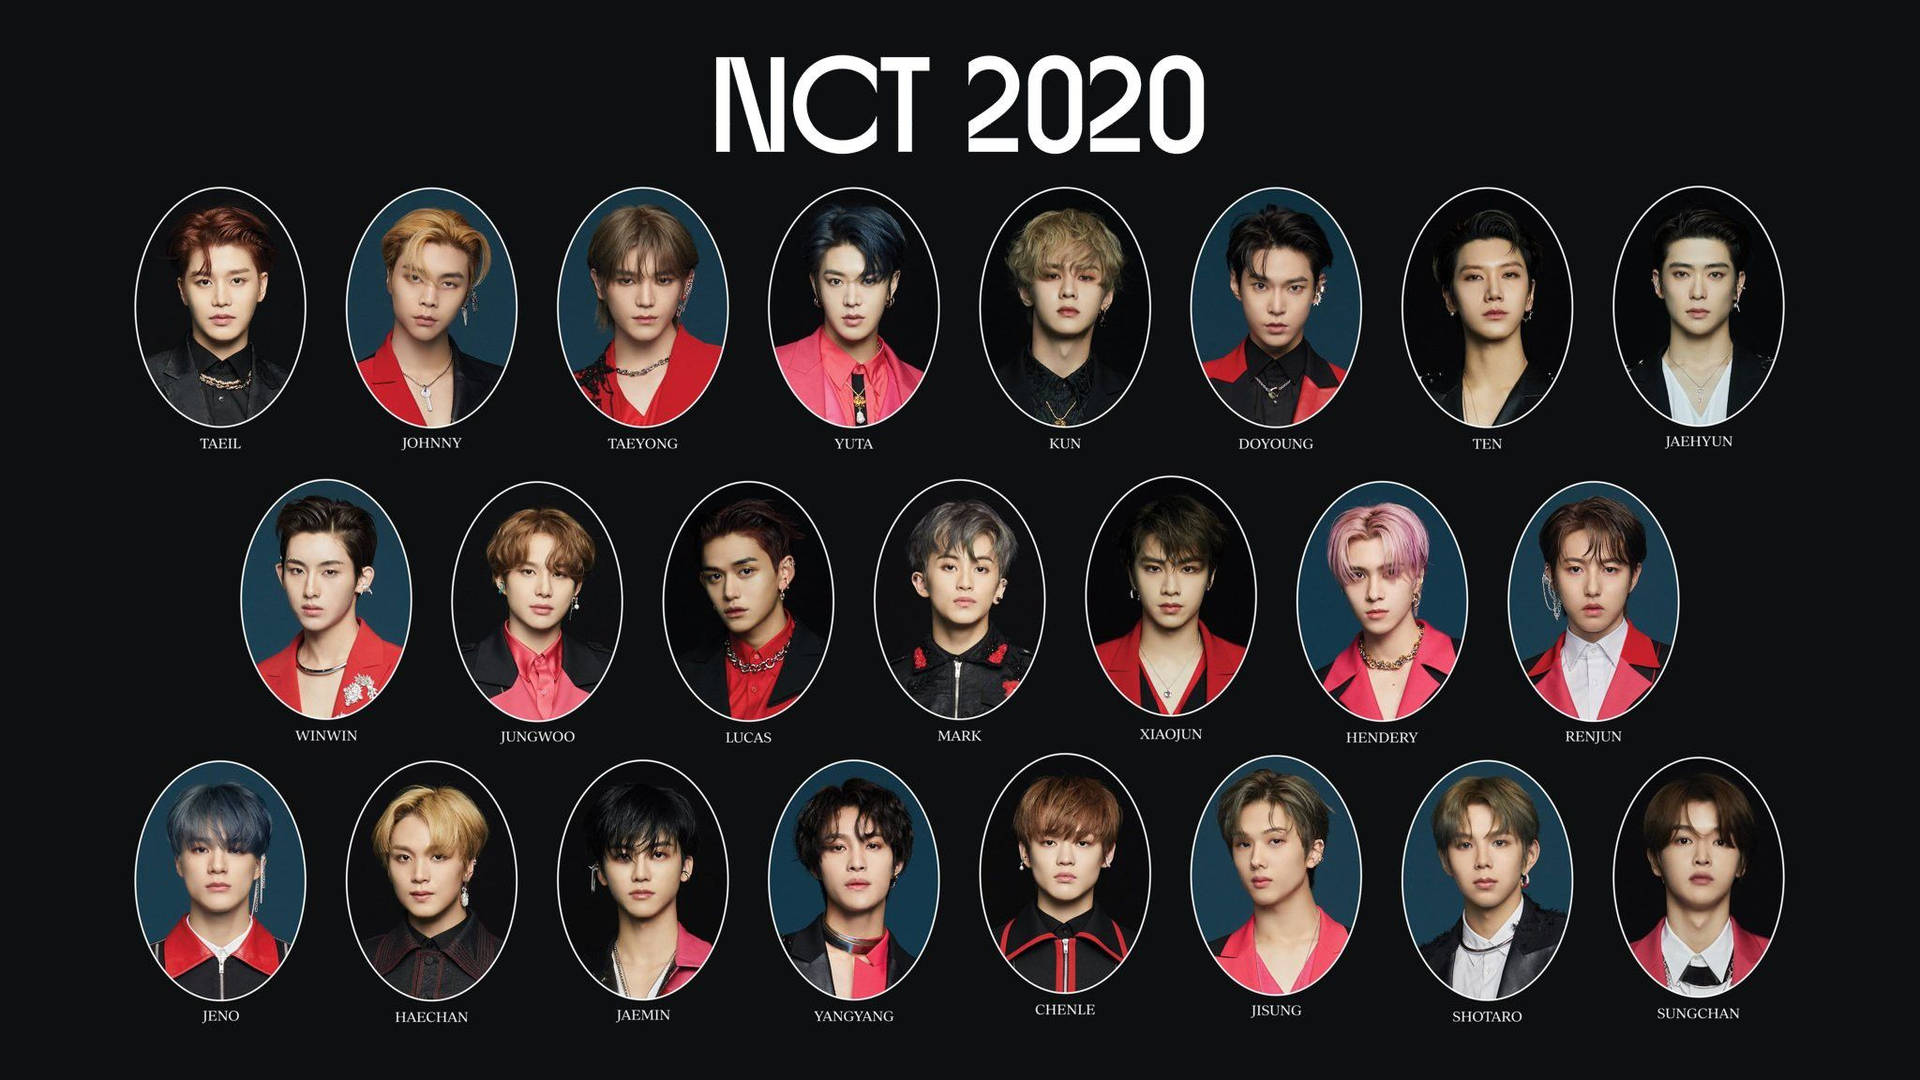 The Popular K-pop Band, Nct 127 Showcasing Their Charisma In A Groovy Group Photograph.